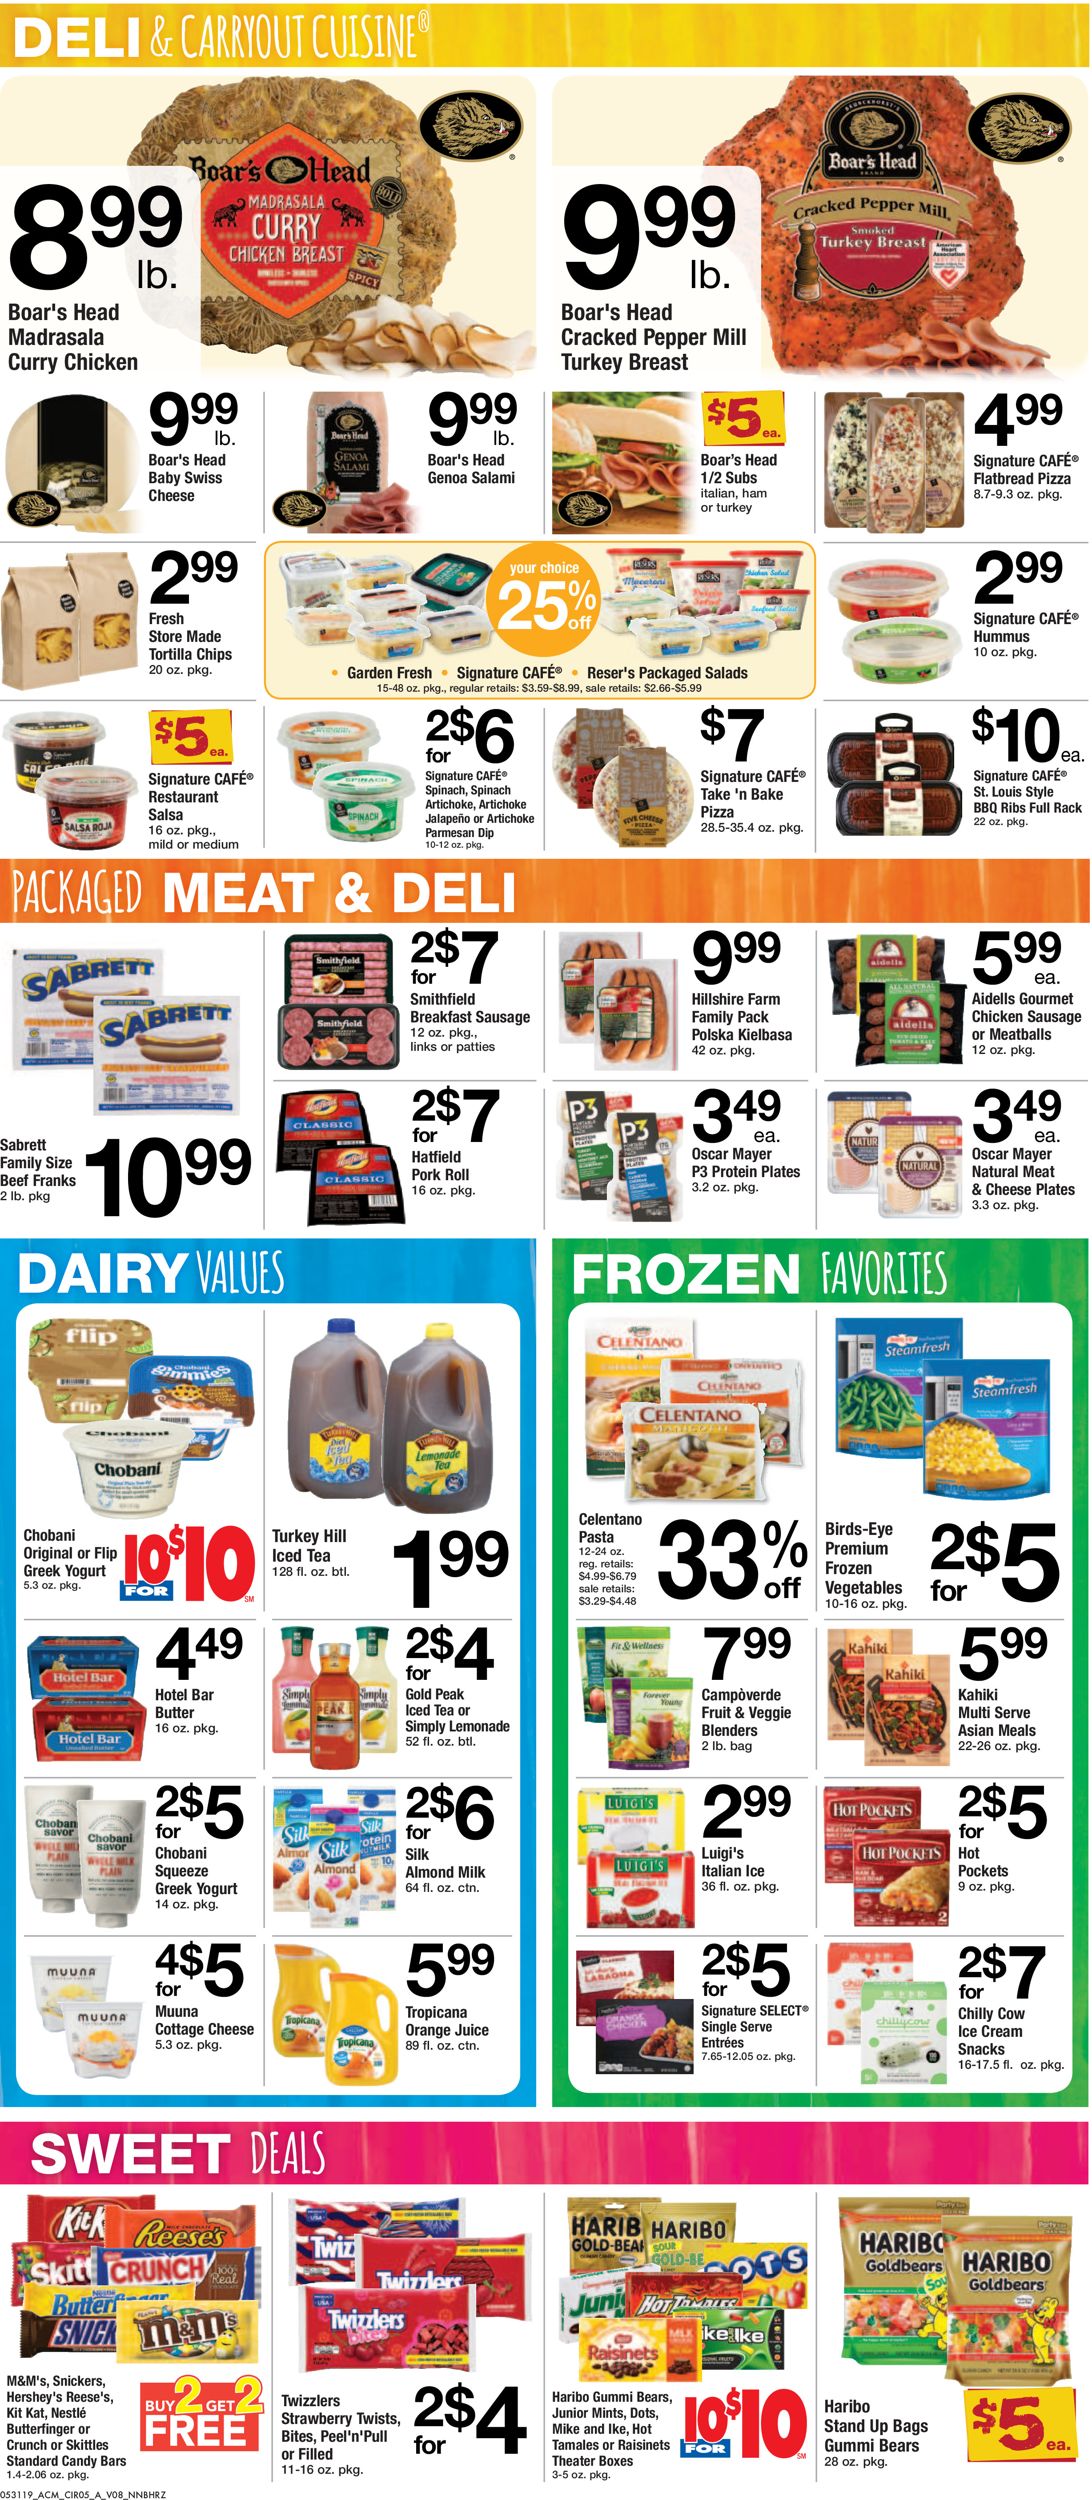 Acme Current weekly ad 05/31 - 06/06/2019 [6] - frequent-ads.com